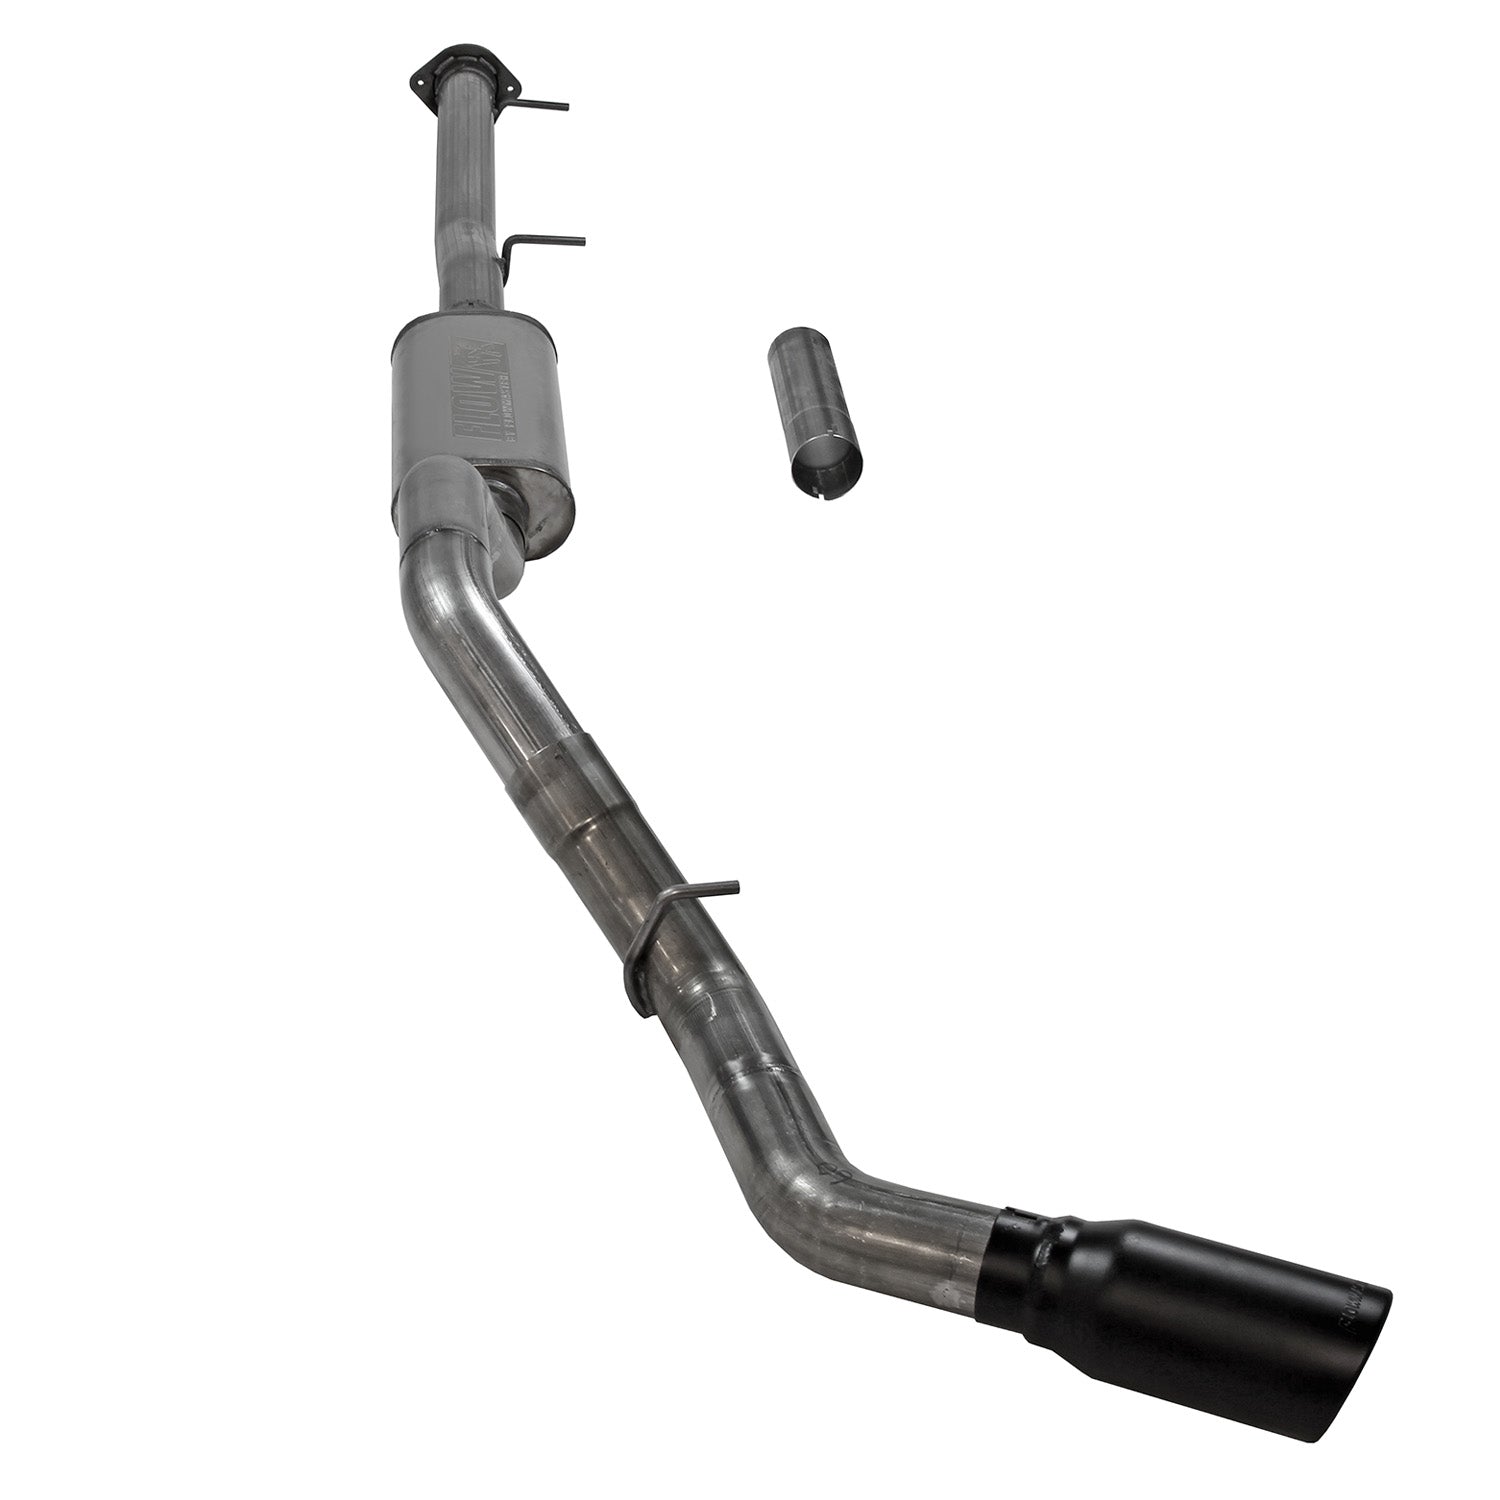 Flowmaster Chevrolet, GMC (Crew Cab Pickup - 6.0) Exhaust System Kit 717931